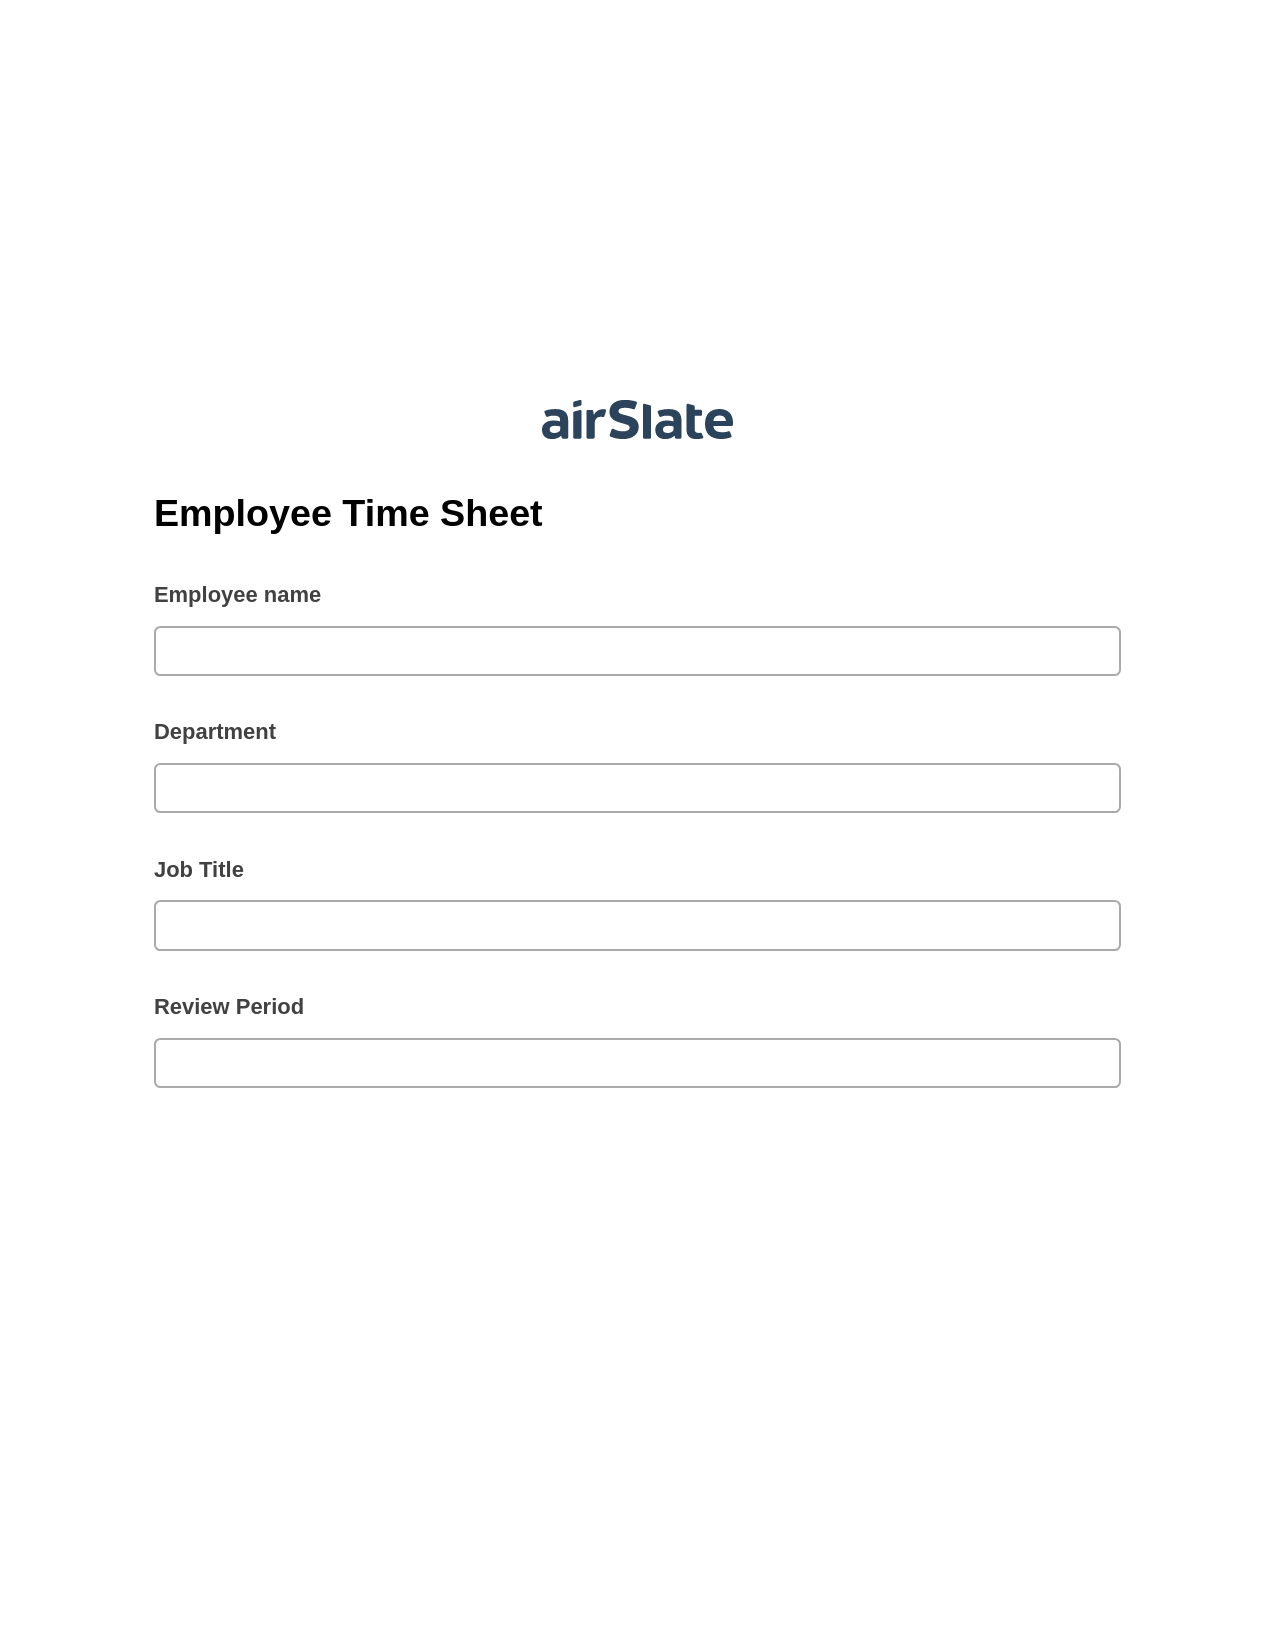 Employee Time Sheet Pre-fill from Salesforce Records Bot, Create slate addon, Archive to Dropbox Bot